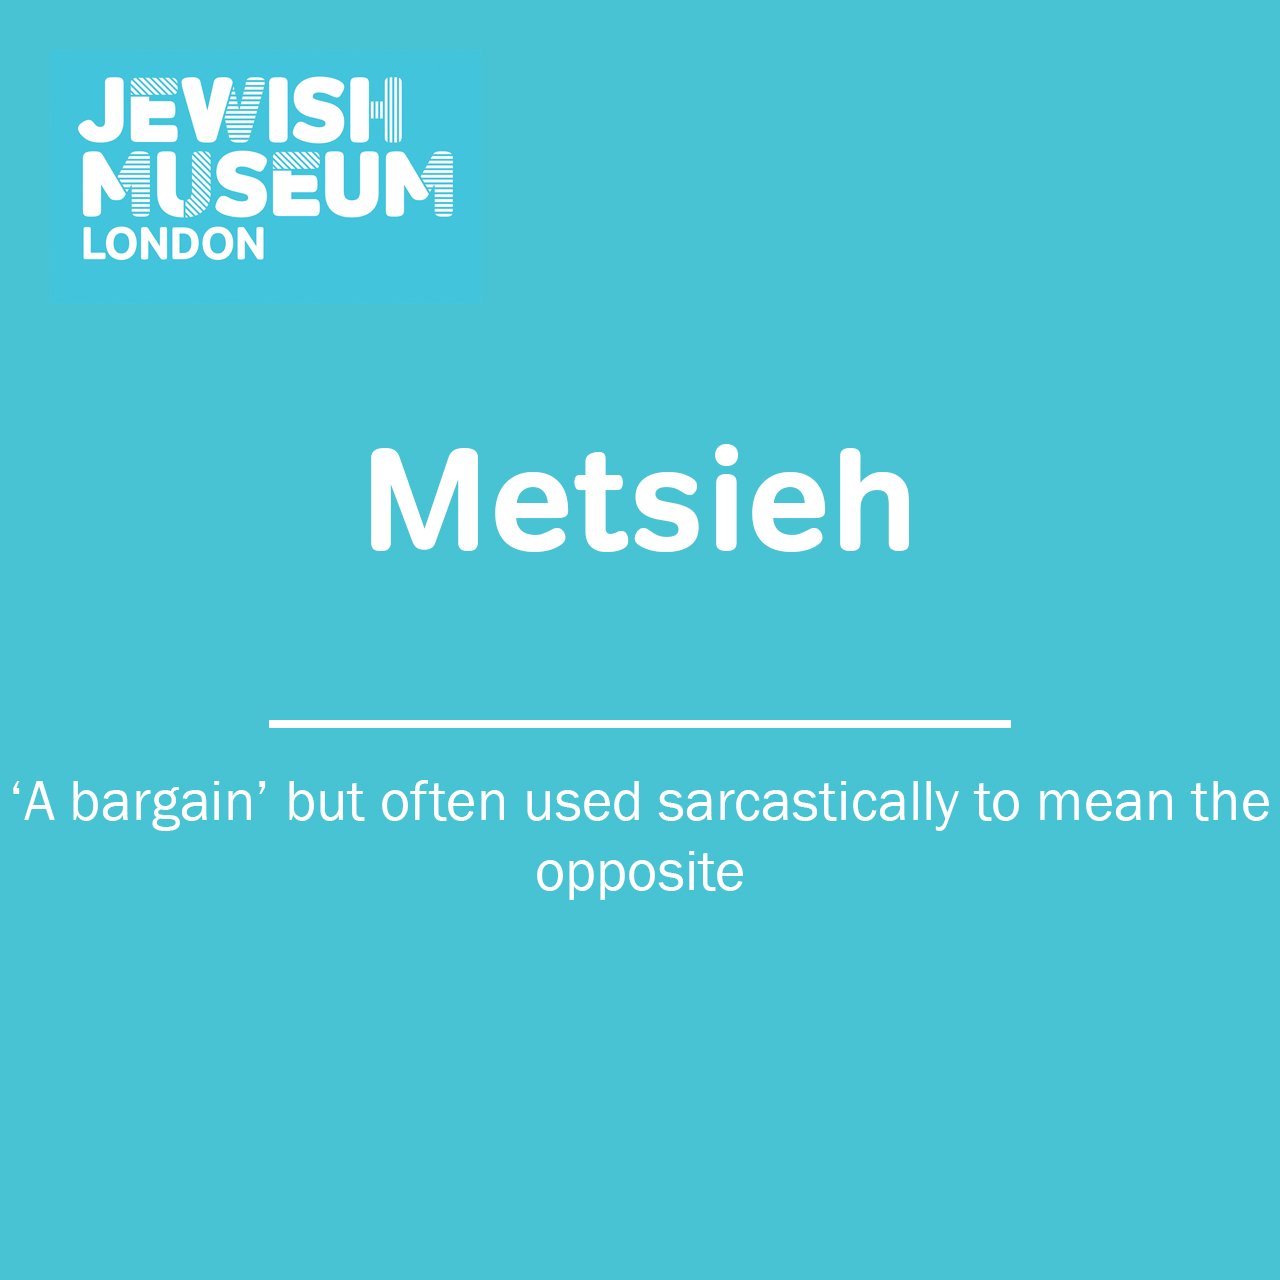 Do You Know What These 14 Yiddish Terms Mean?